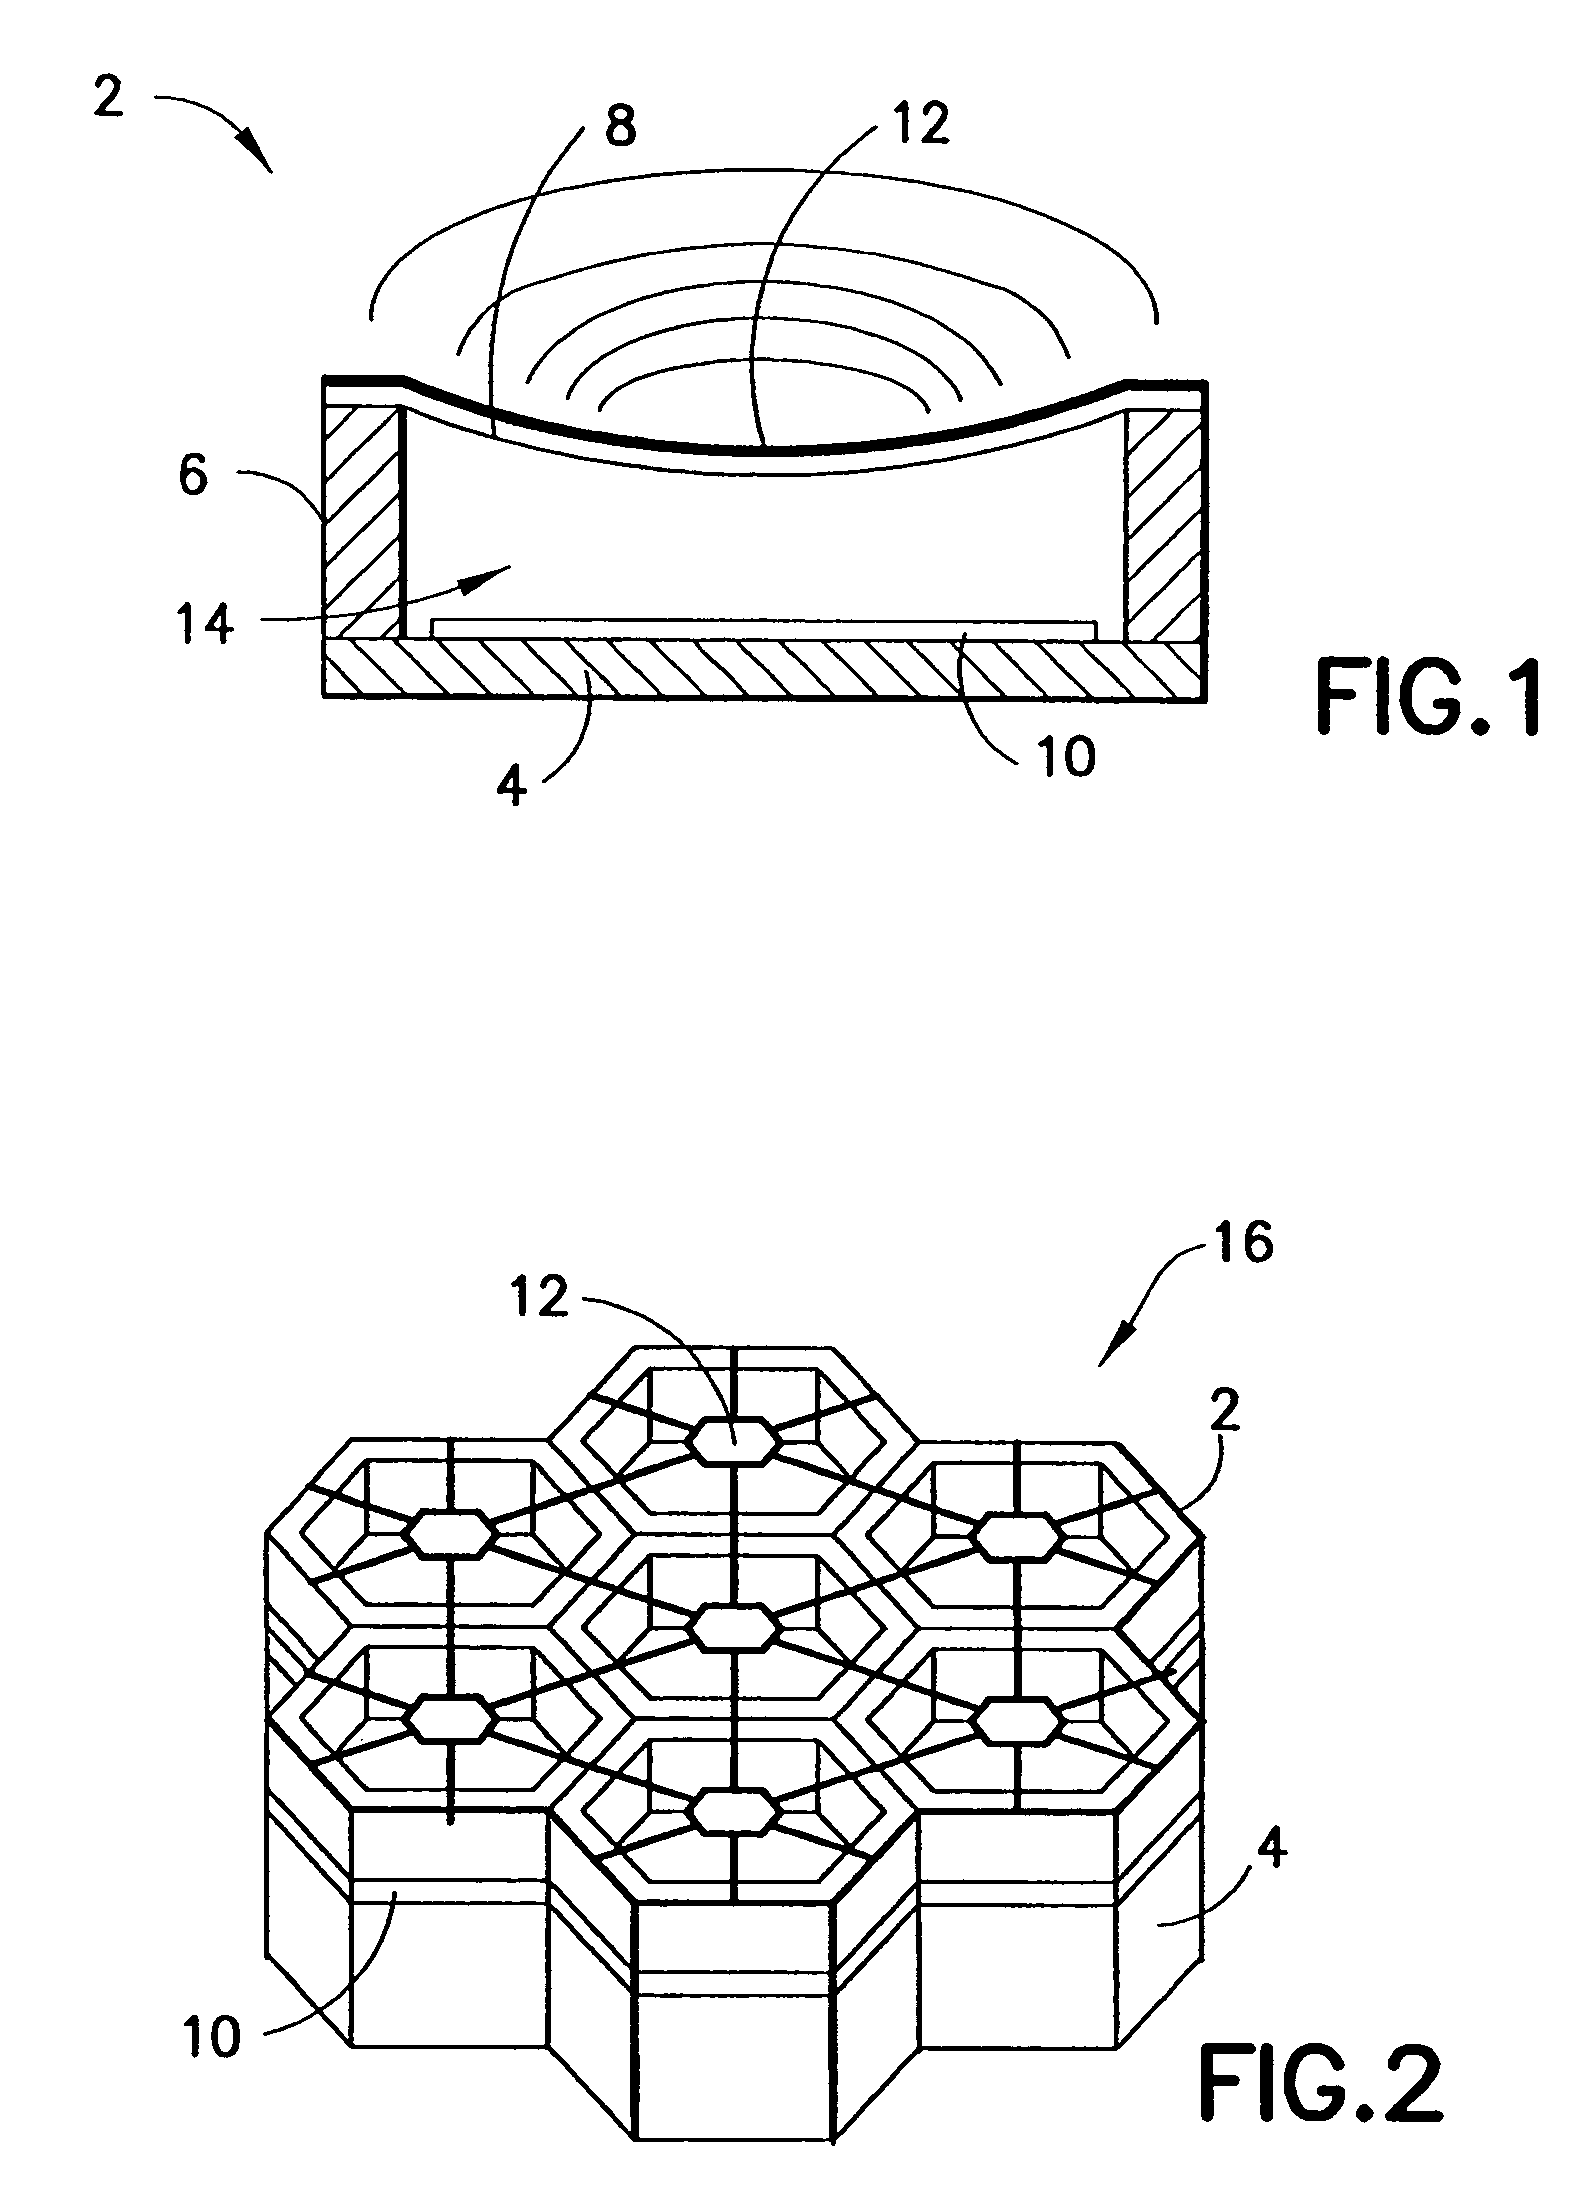 Optimized switching configurations for reconfigurable arrays of sensor elements